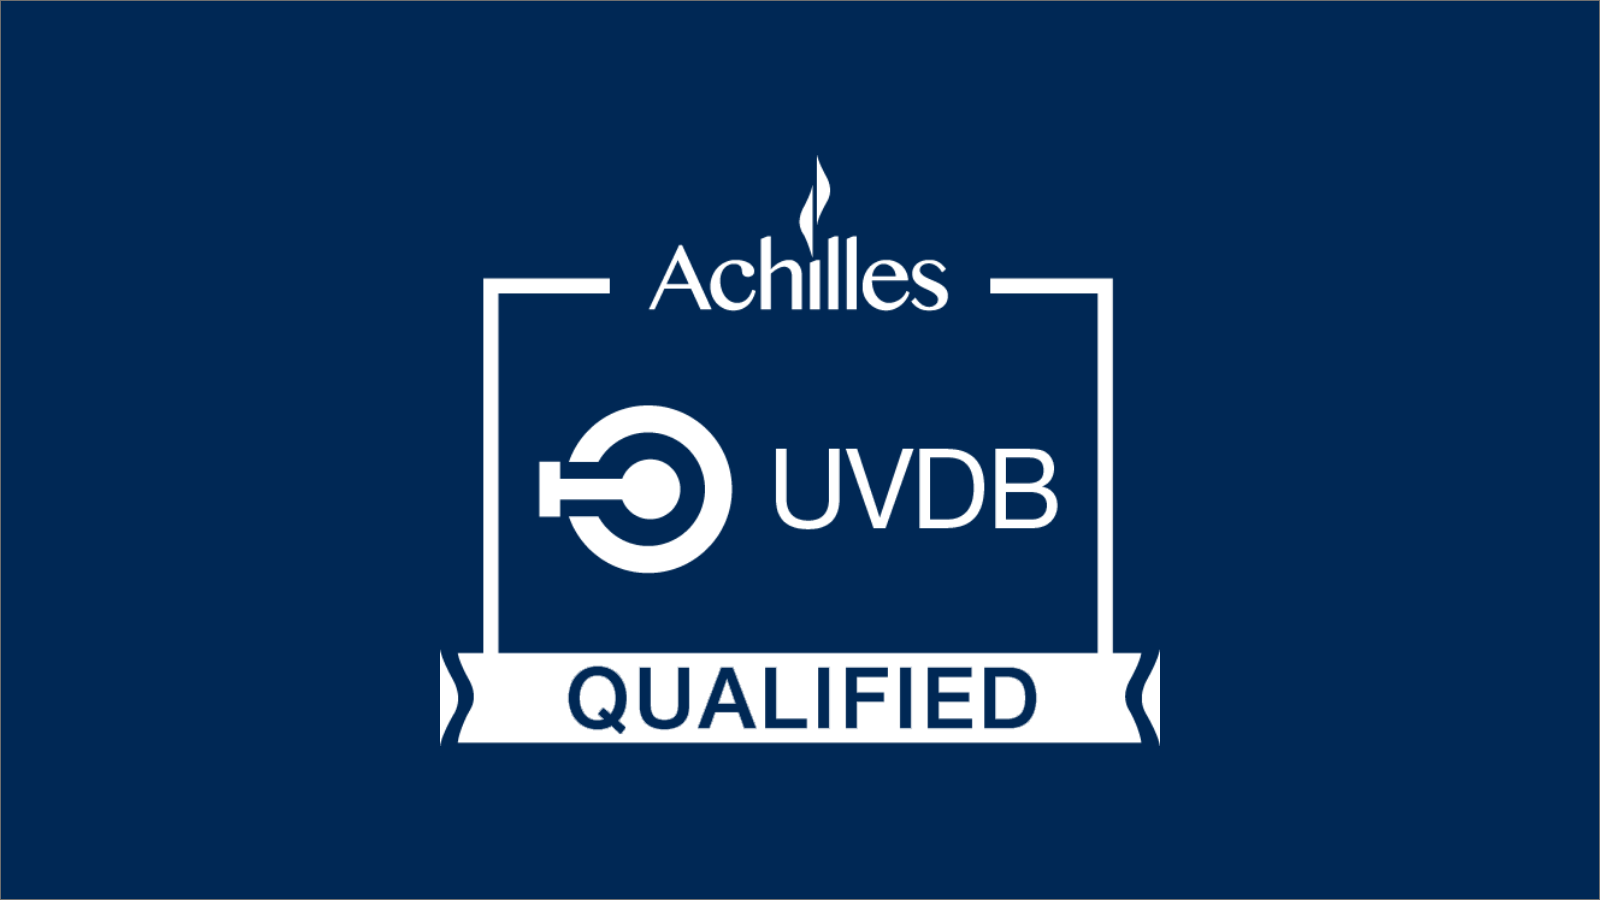 Achilles accreditation - security solutions